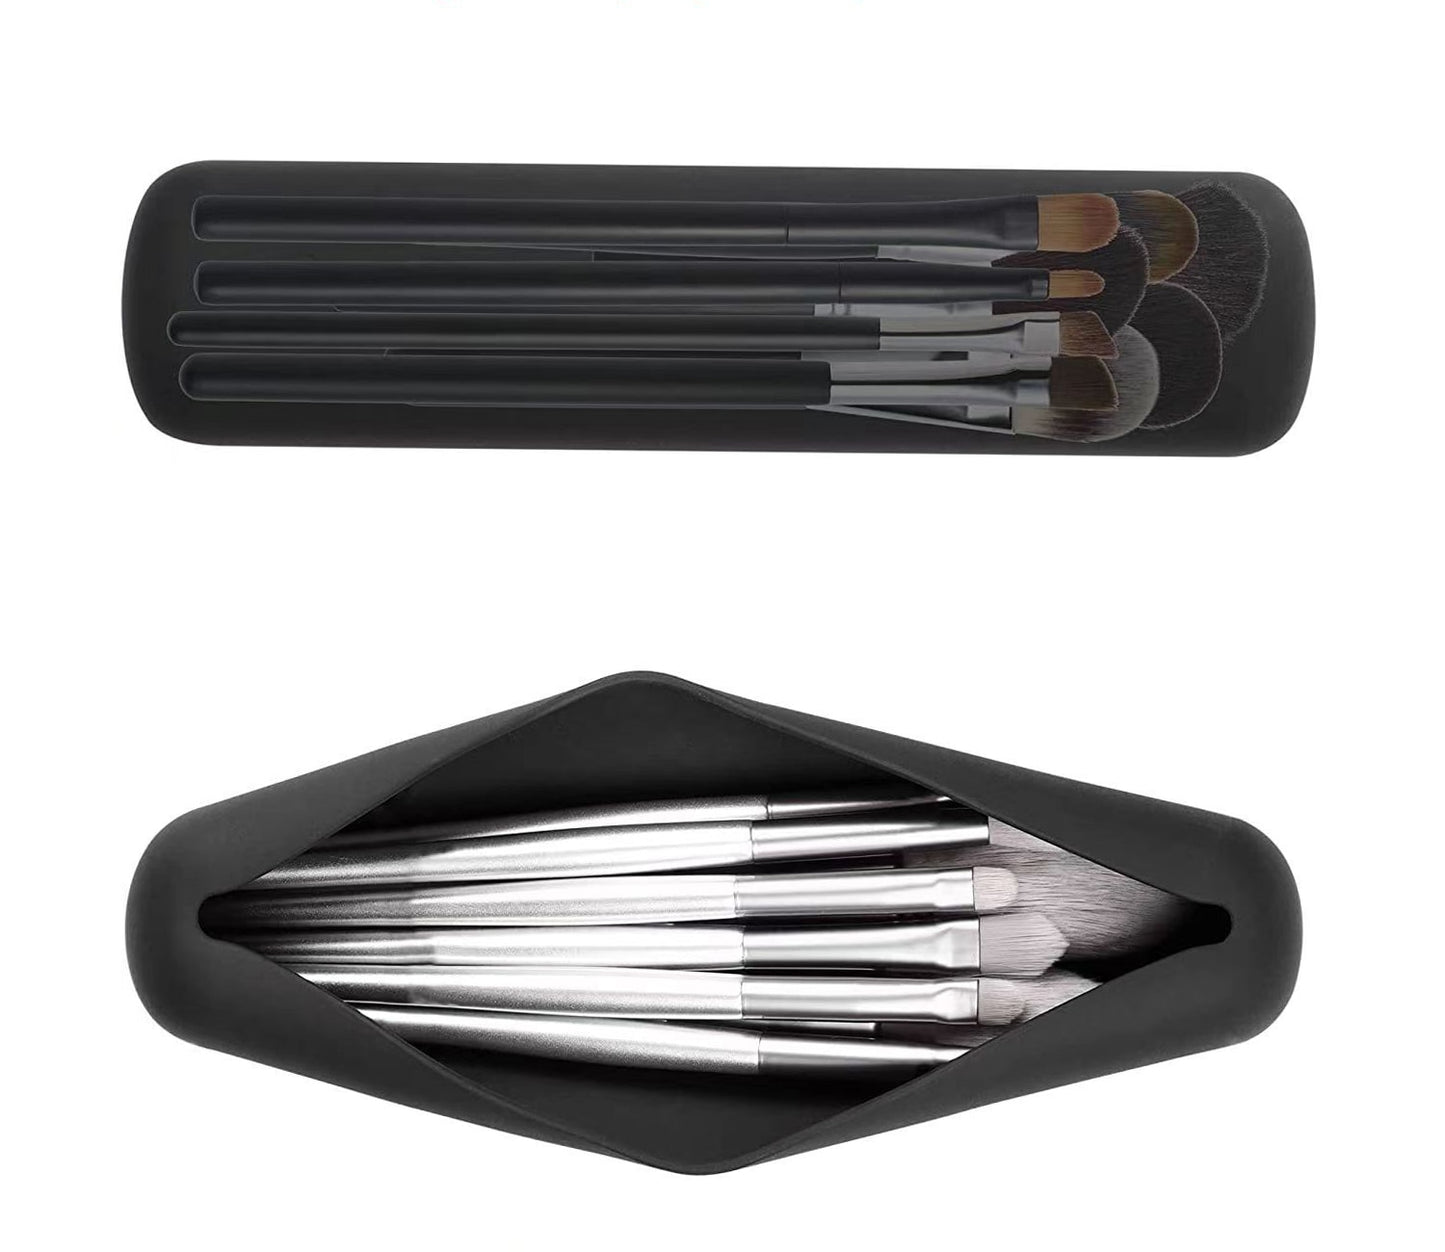 Silicone Makeup Brush Case for Travel Convenience